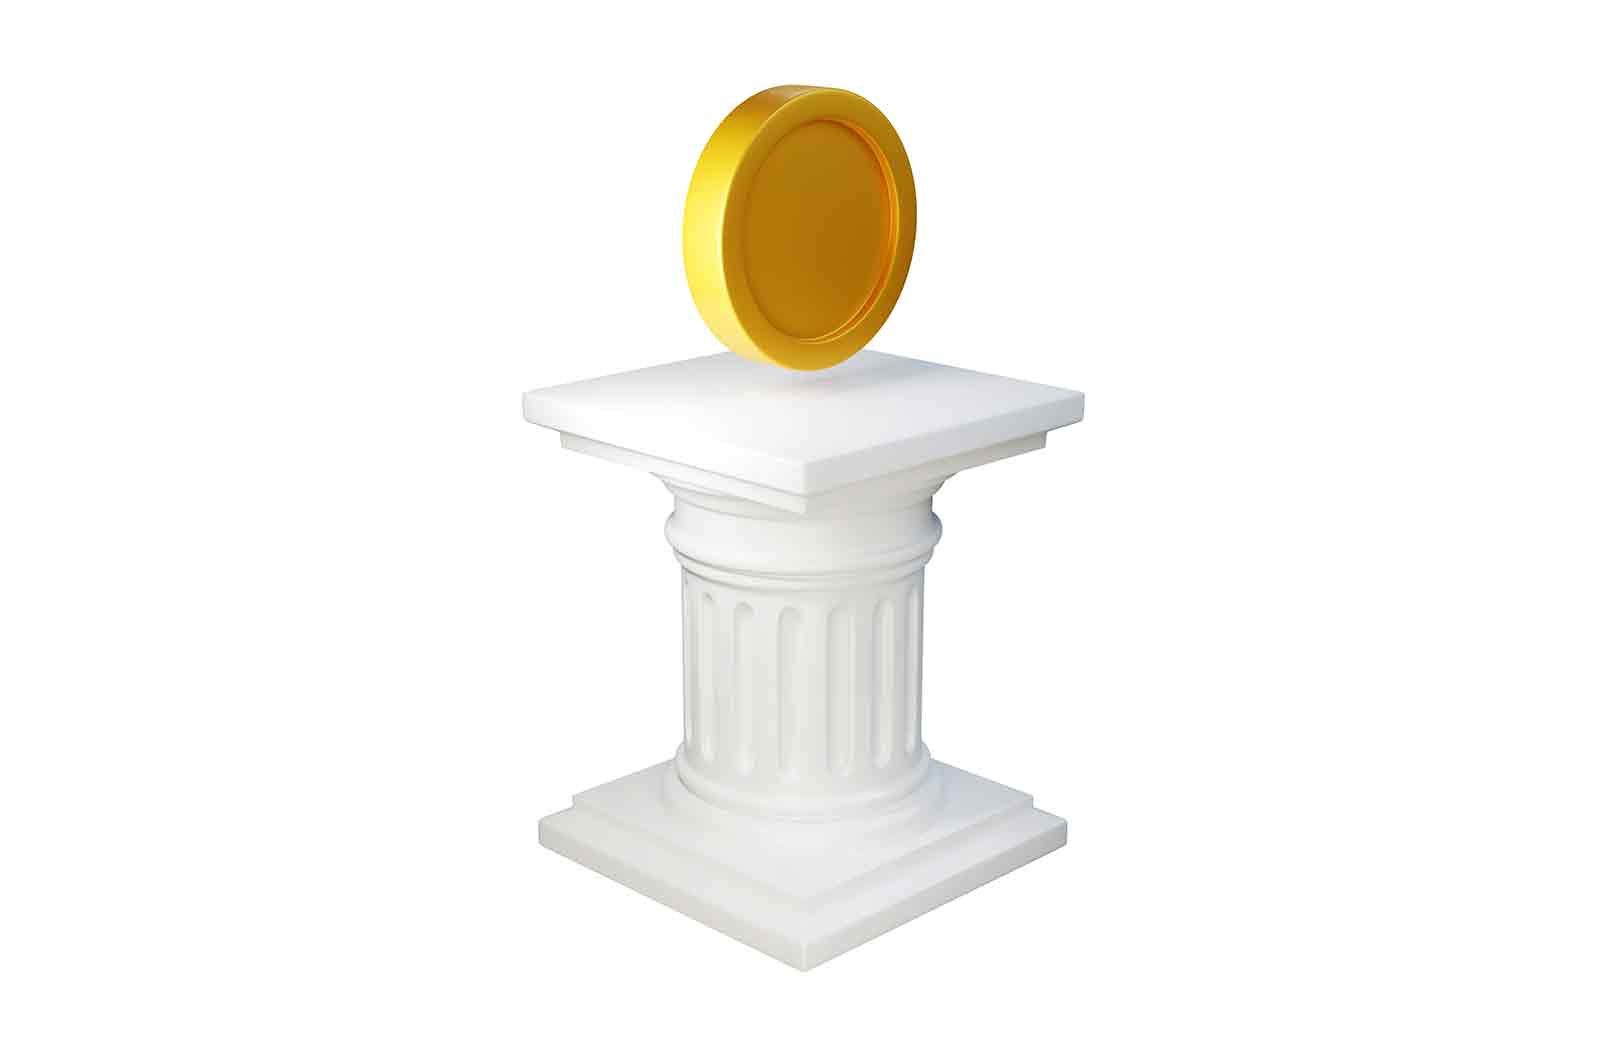 Antique column with golden coin on top icon 3D render illustration. Money exchange and financial services concept